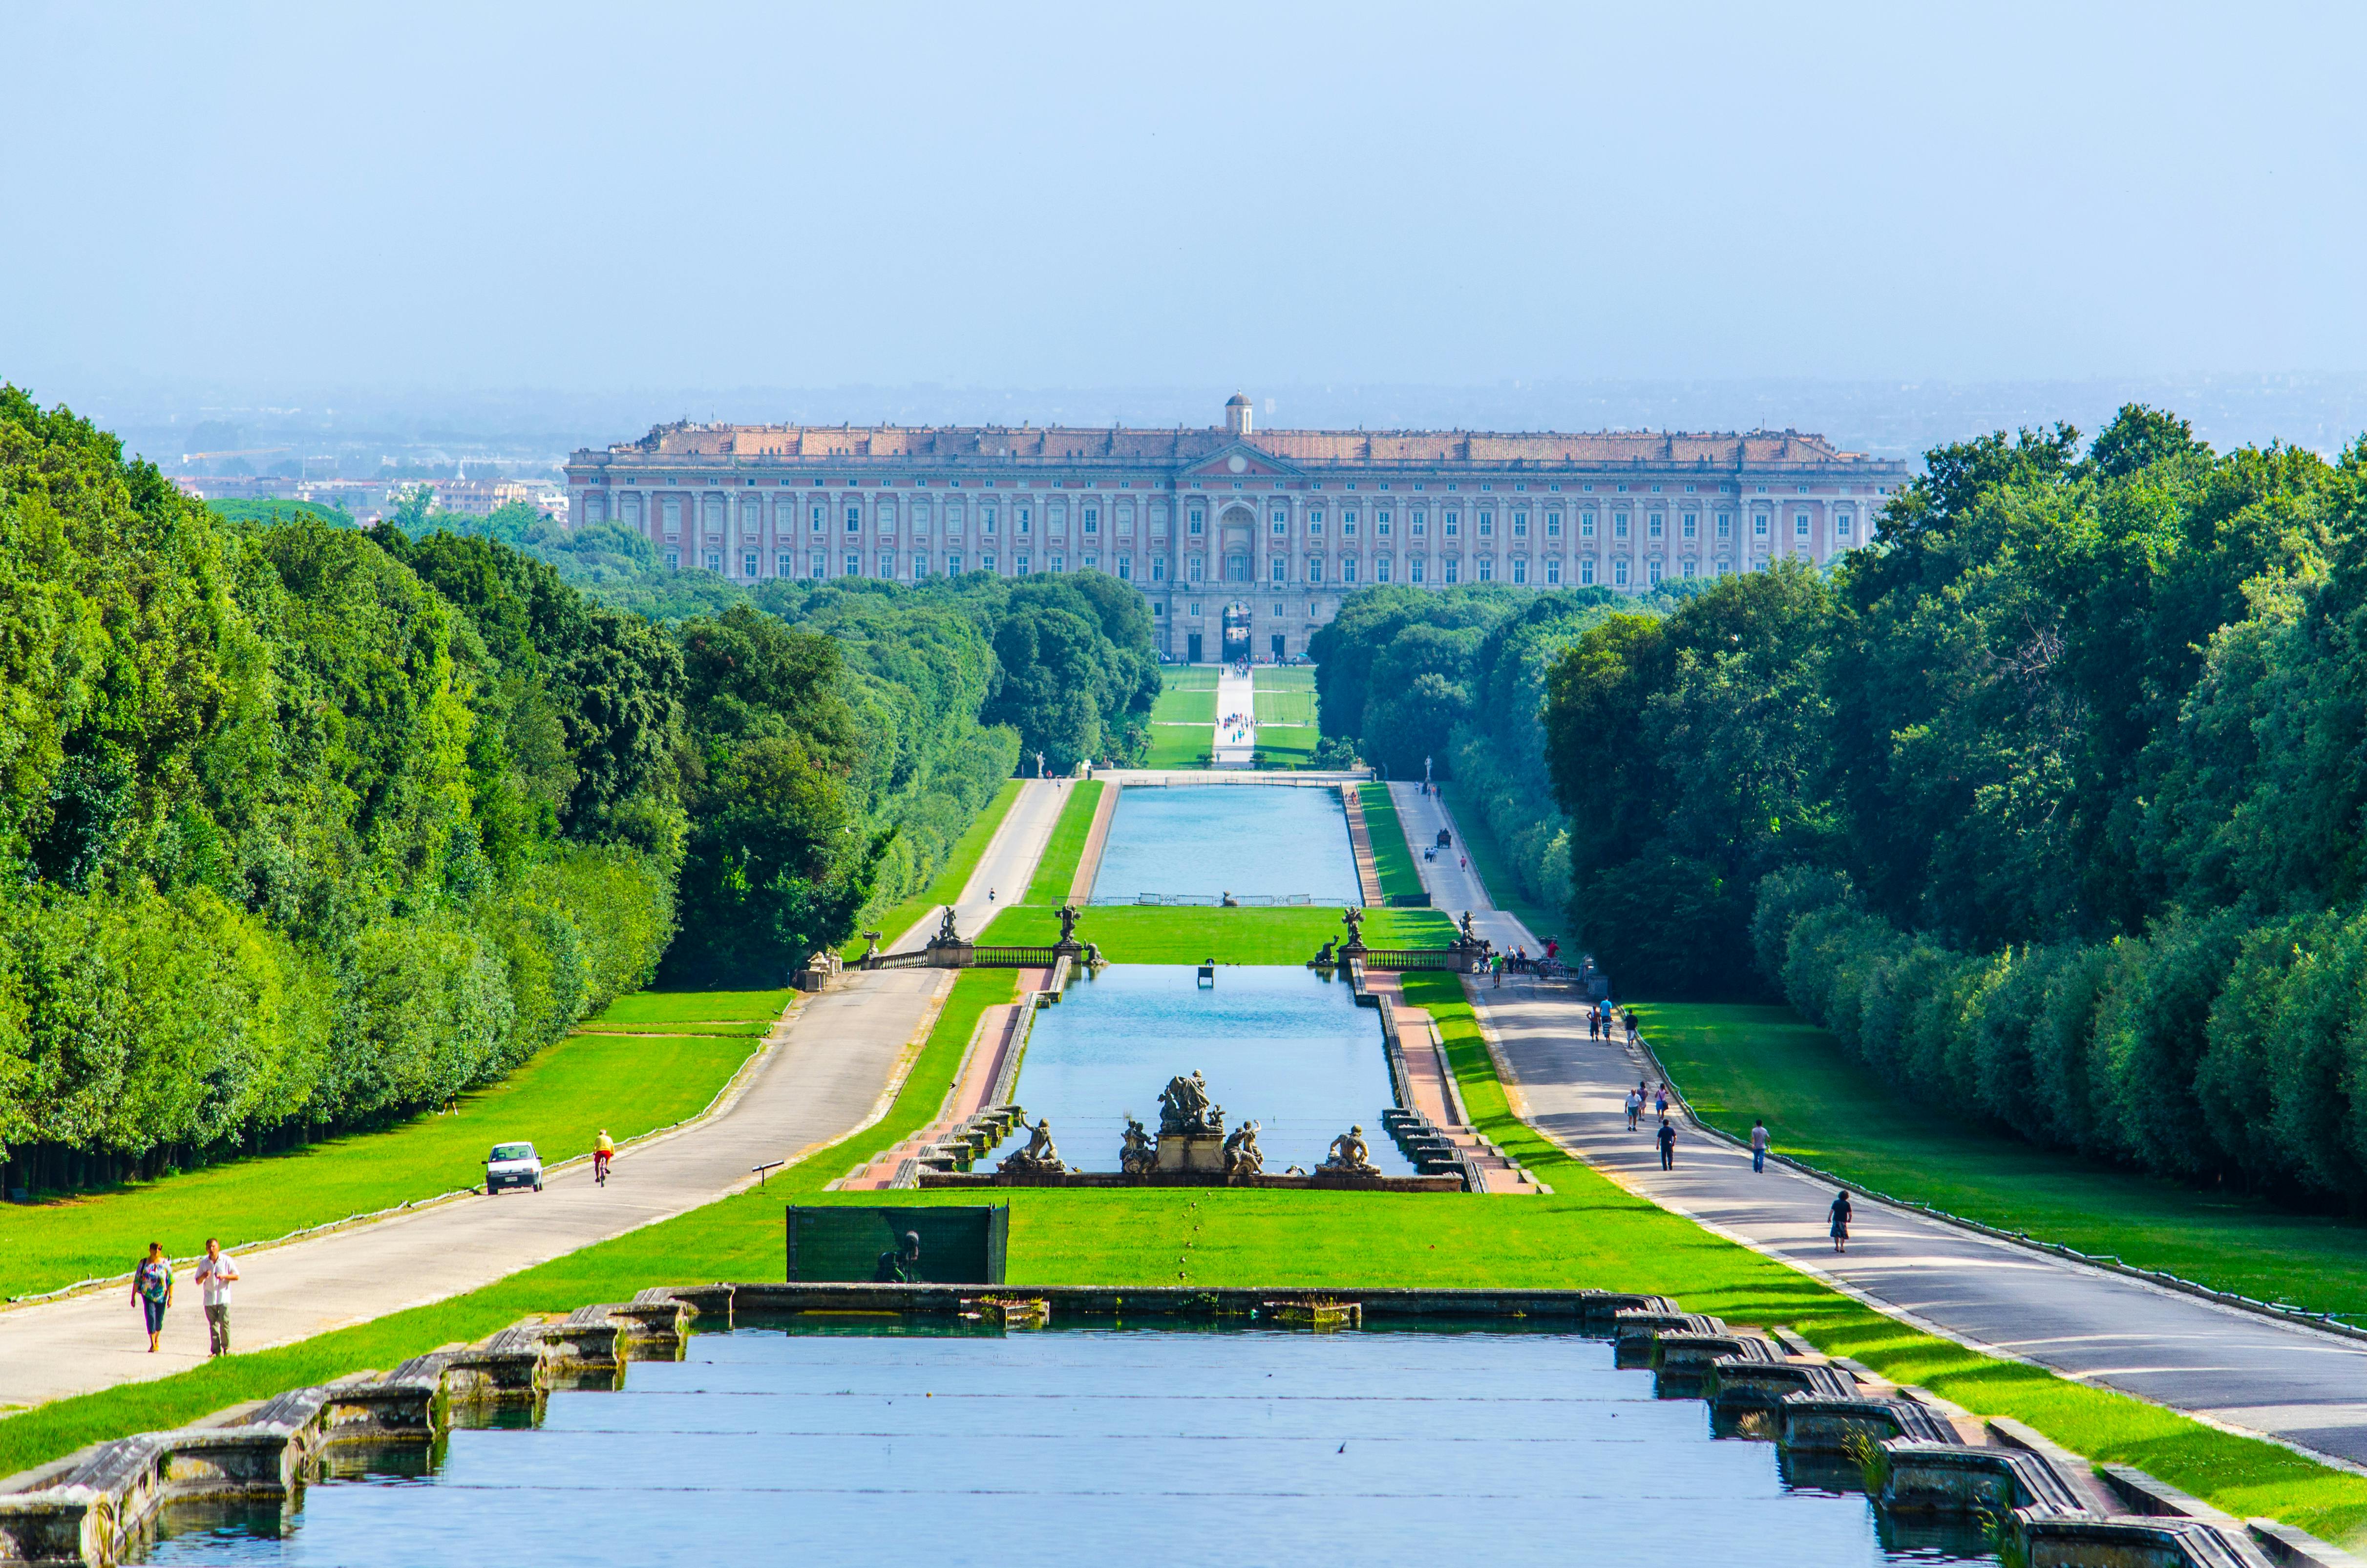 Caserta Royal Palace day trip from Naples. Musement